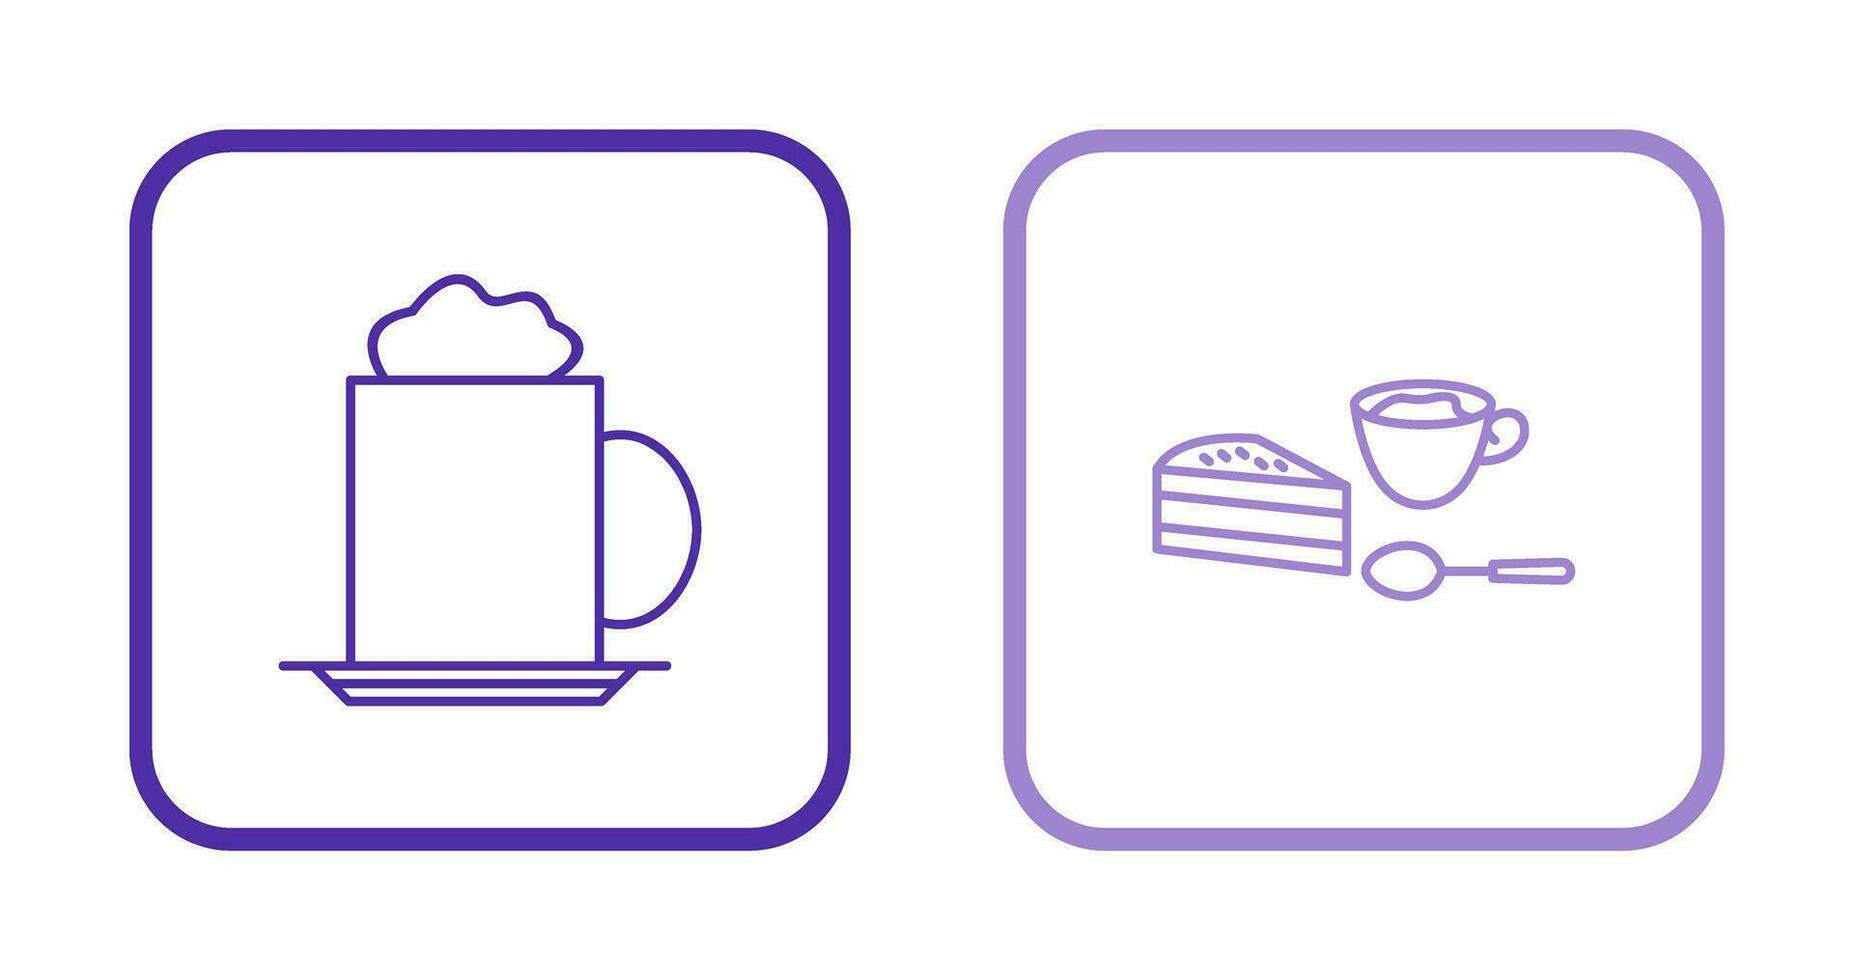 capppucino and coffee served  Icon vector